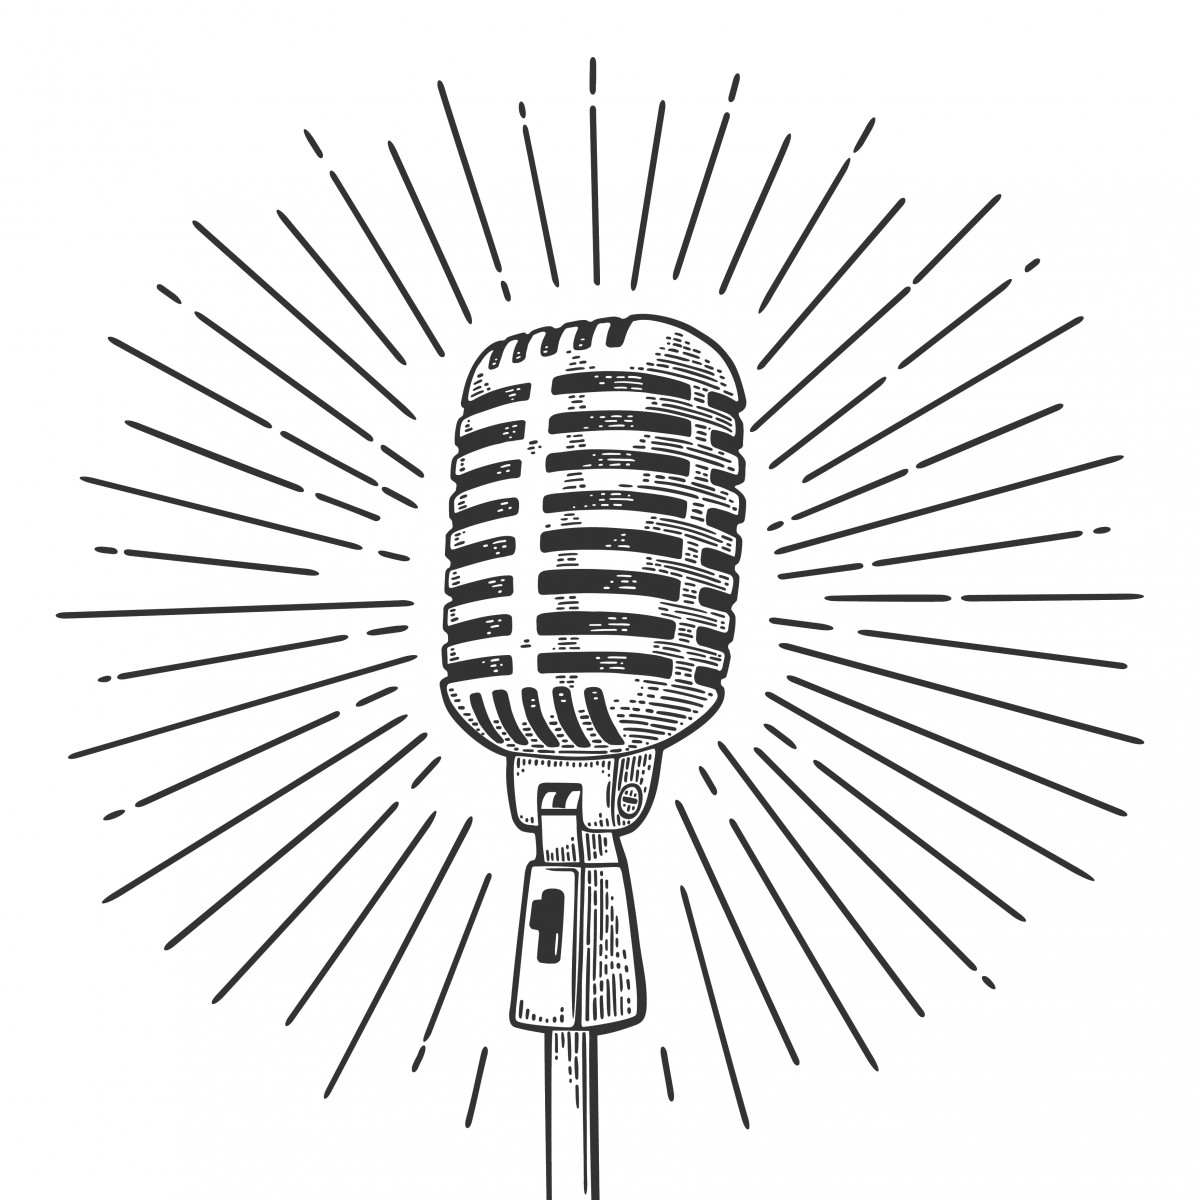 Microphone graphic from iStock.